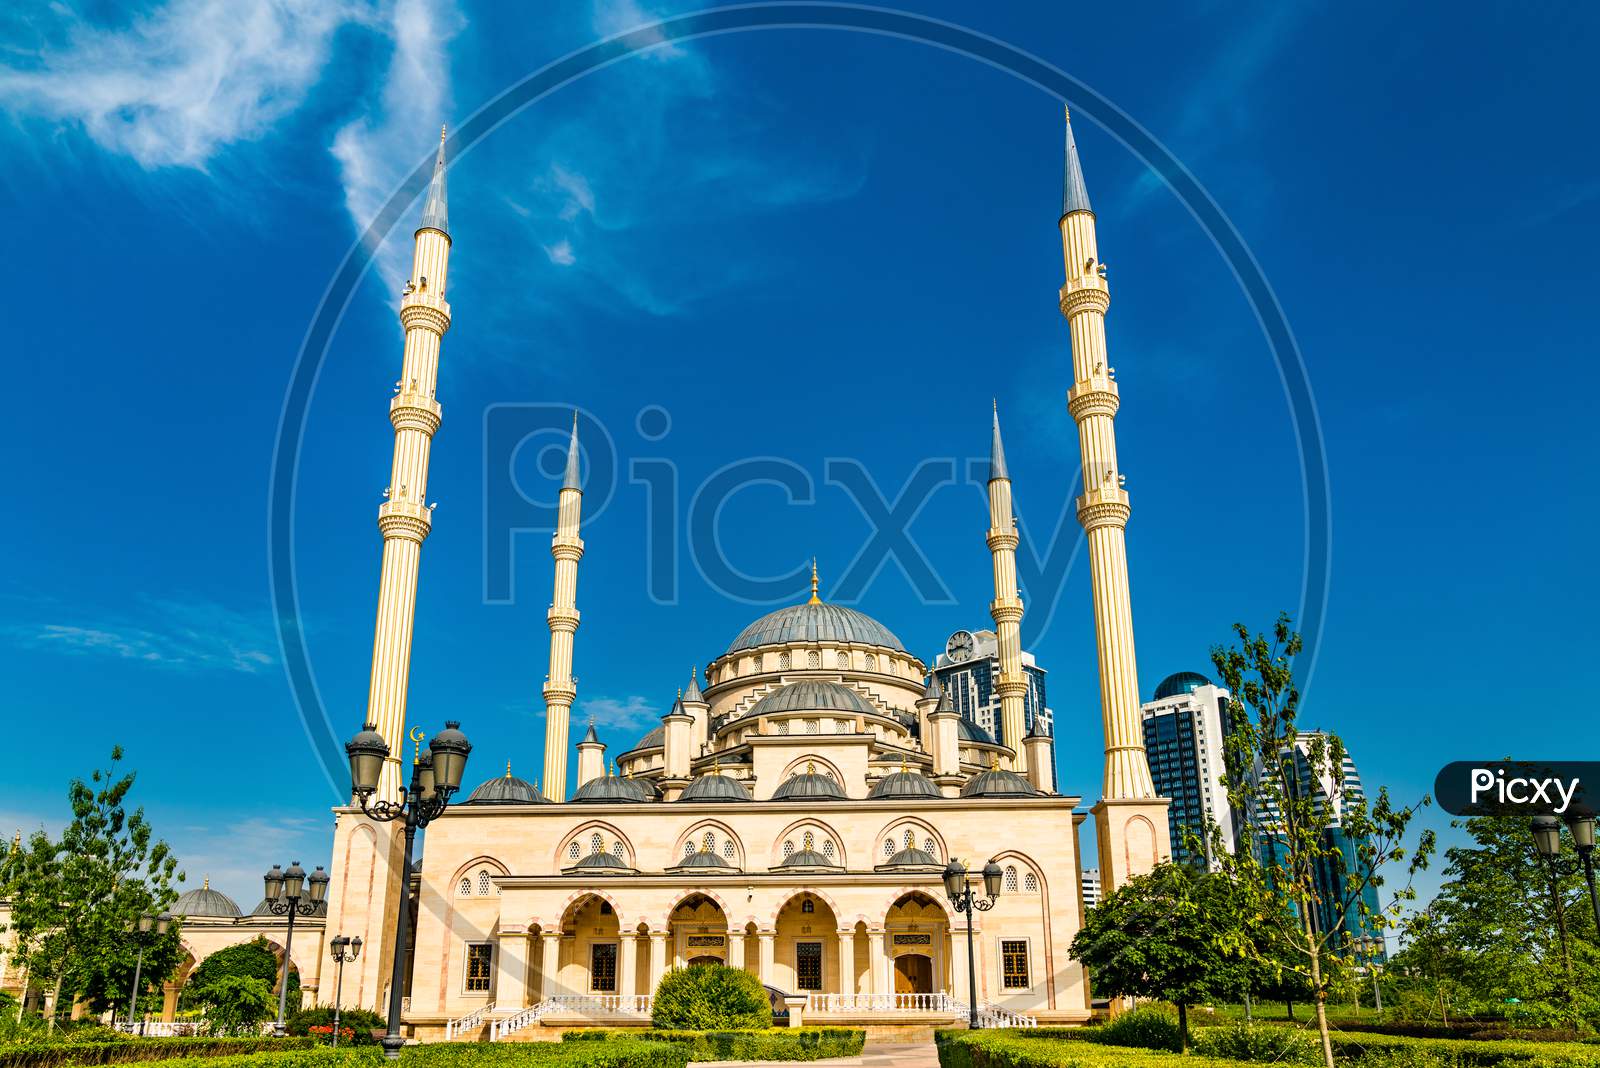 The Heart Of Chechnya Mosque In Grozny, Russia